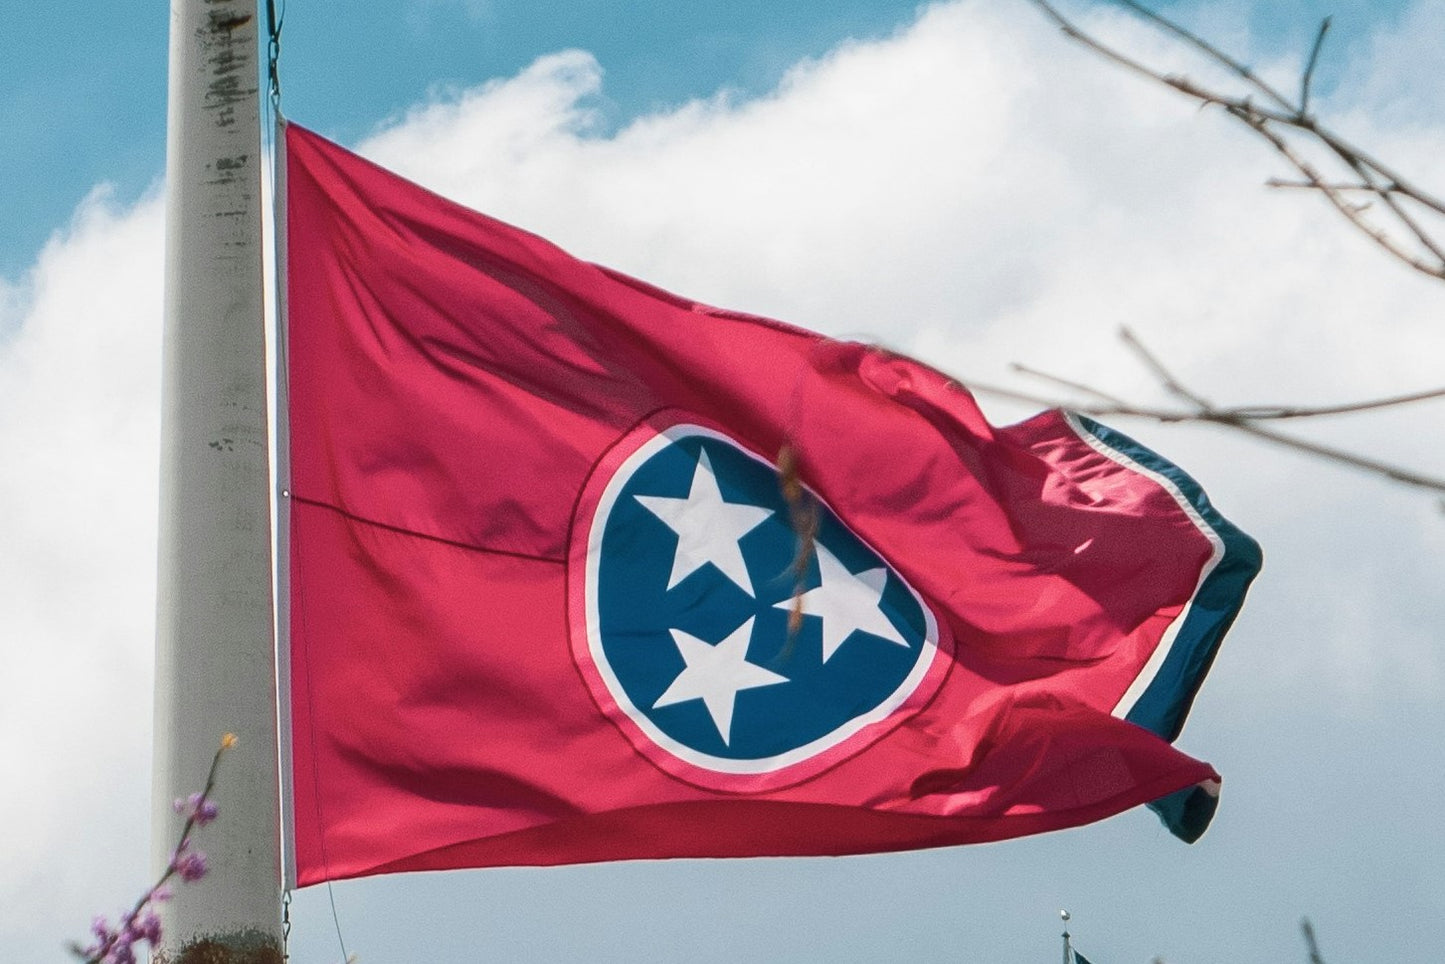 A photo of the flag of Tennessee flying on a flagpole with some branches around it and a cloudy sky in the background.